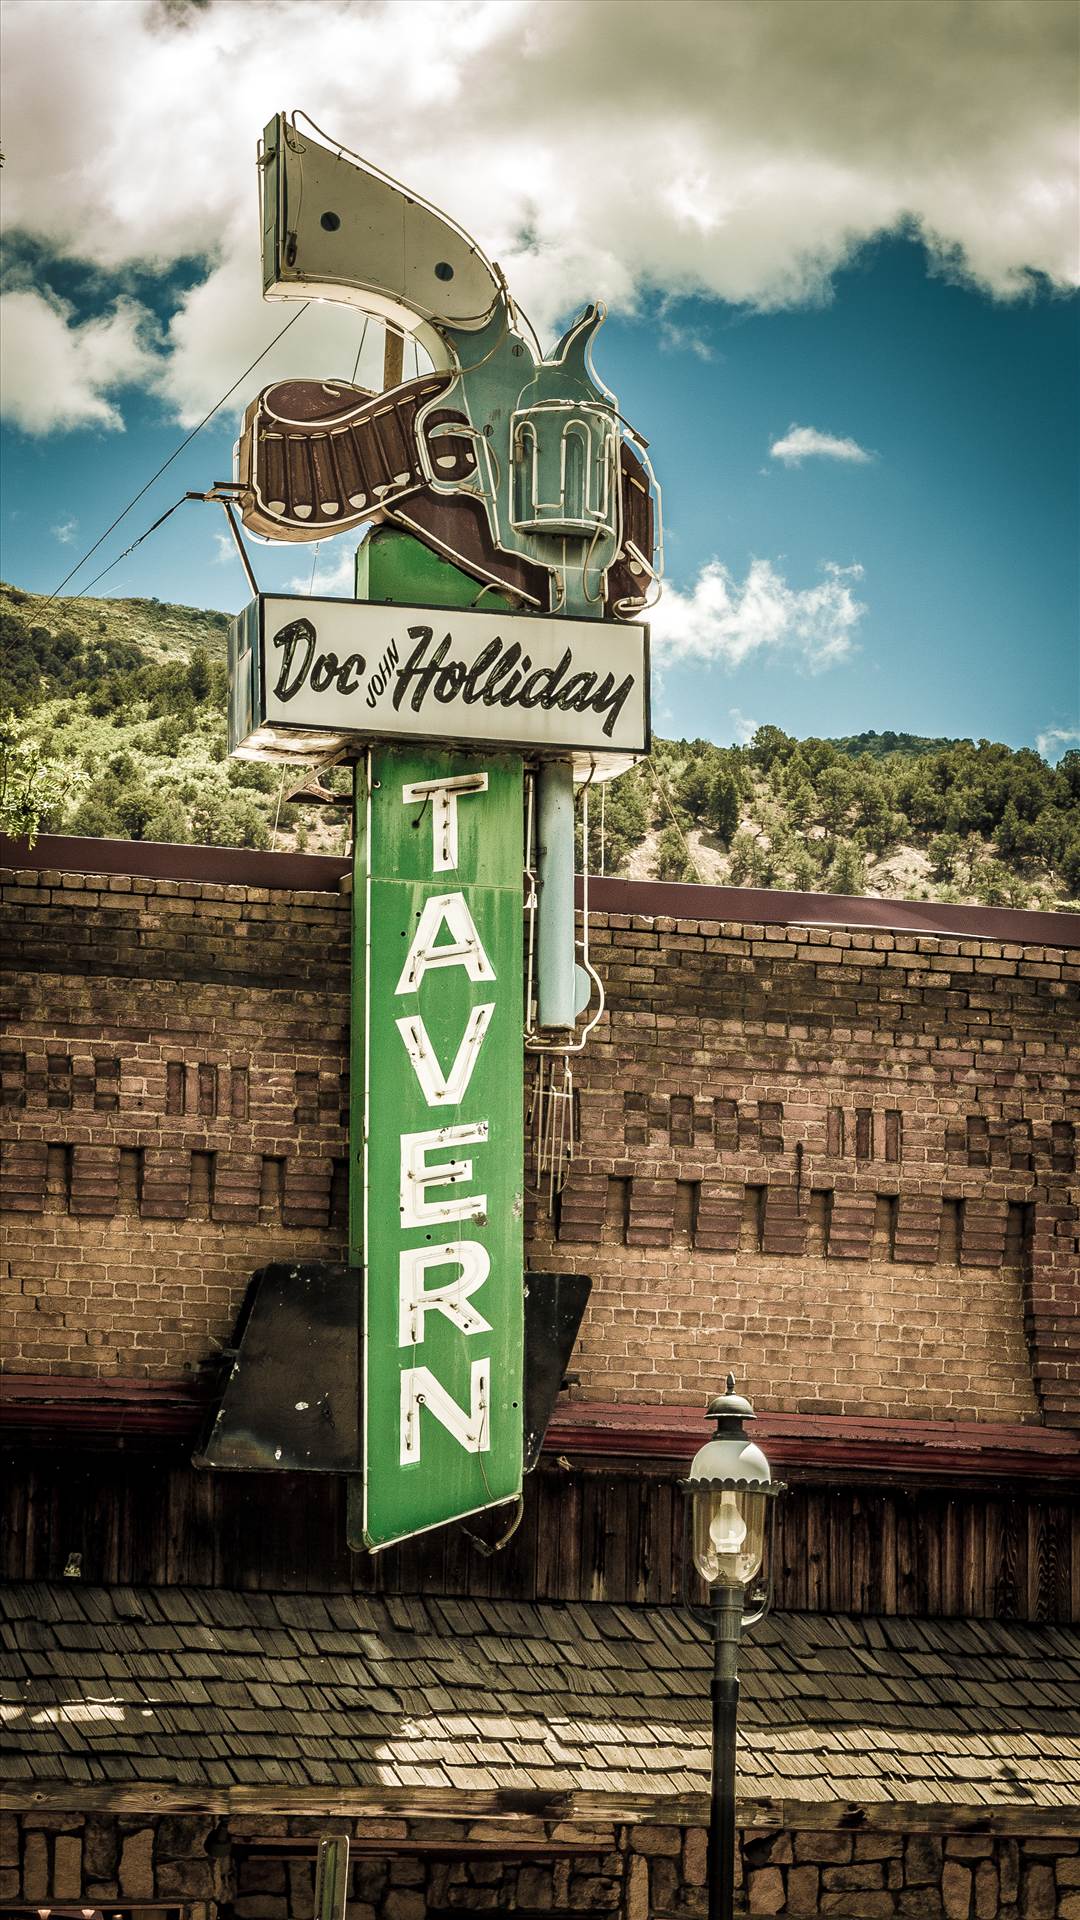 Doc Holliday Tavern in Glenwood Springs - The famous sign for the Doc Holliday Tavern in Glenwood Springs by Scott Smith Photos